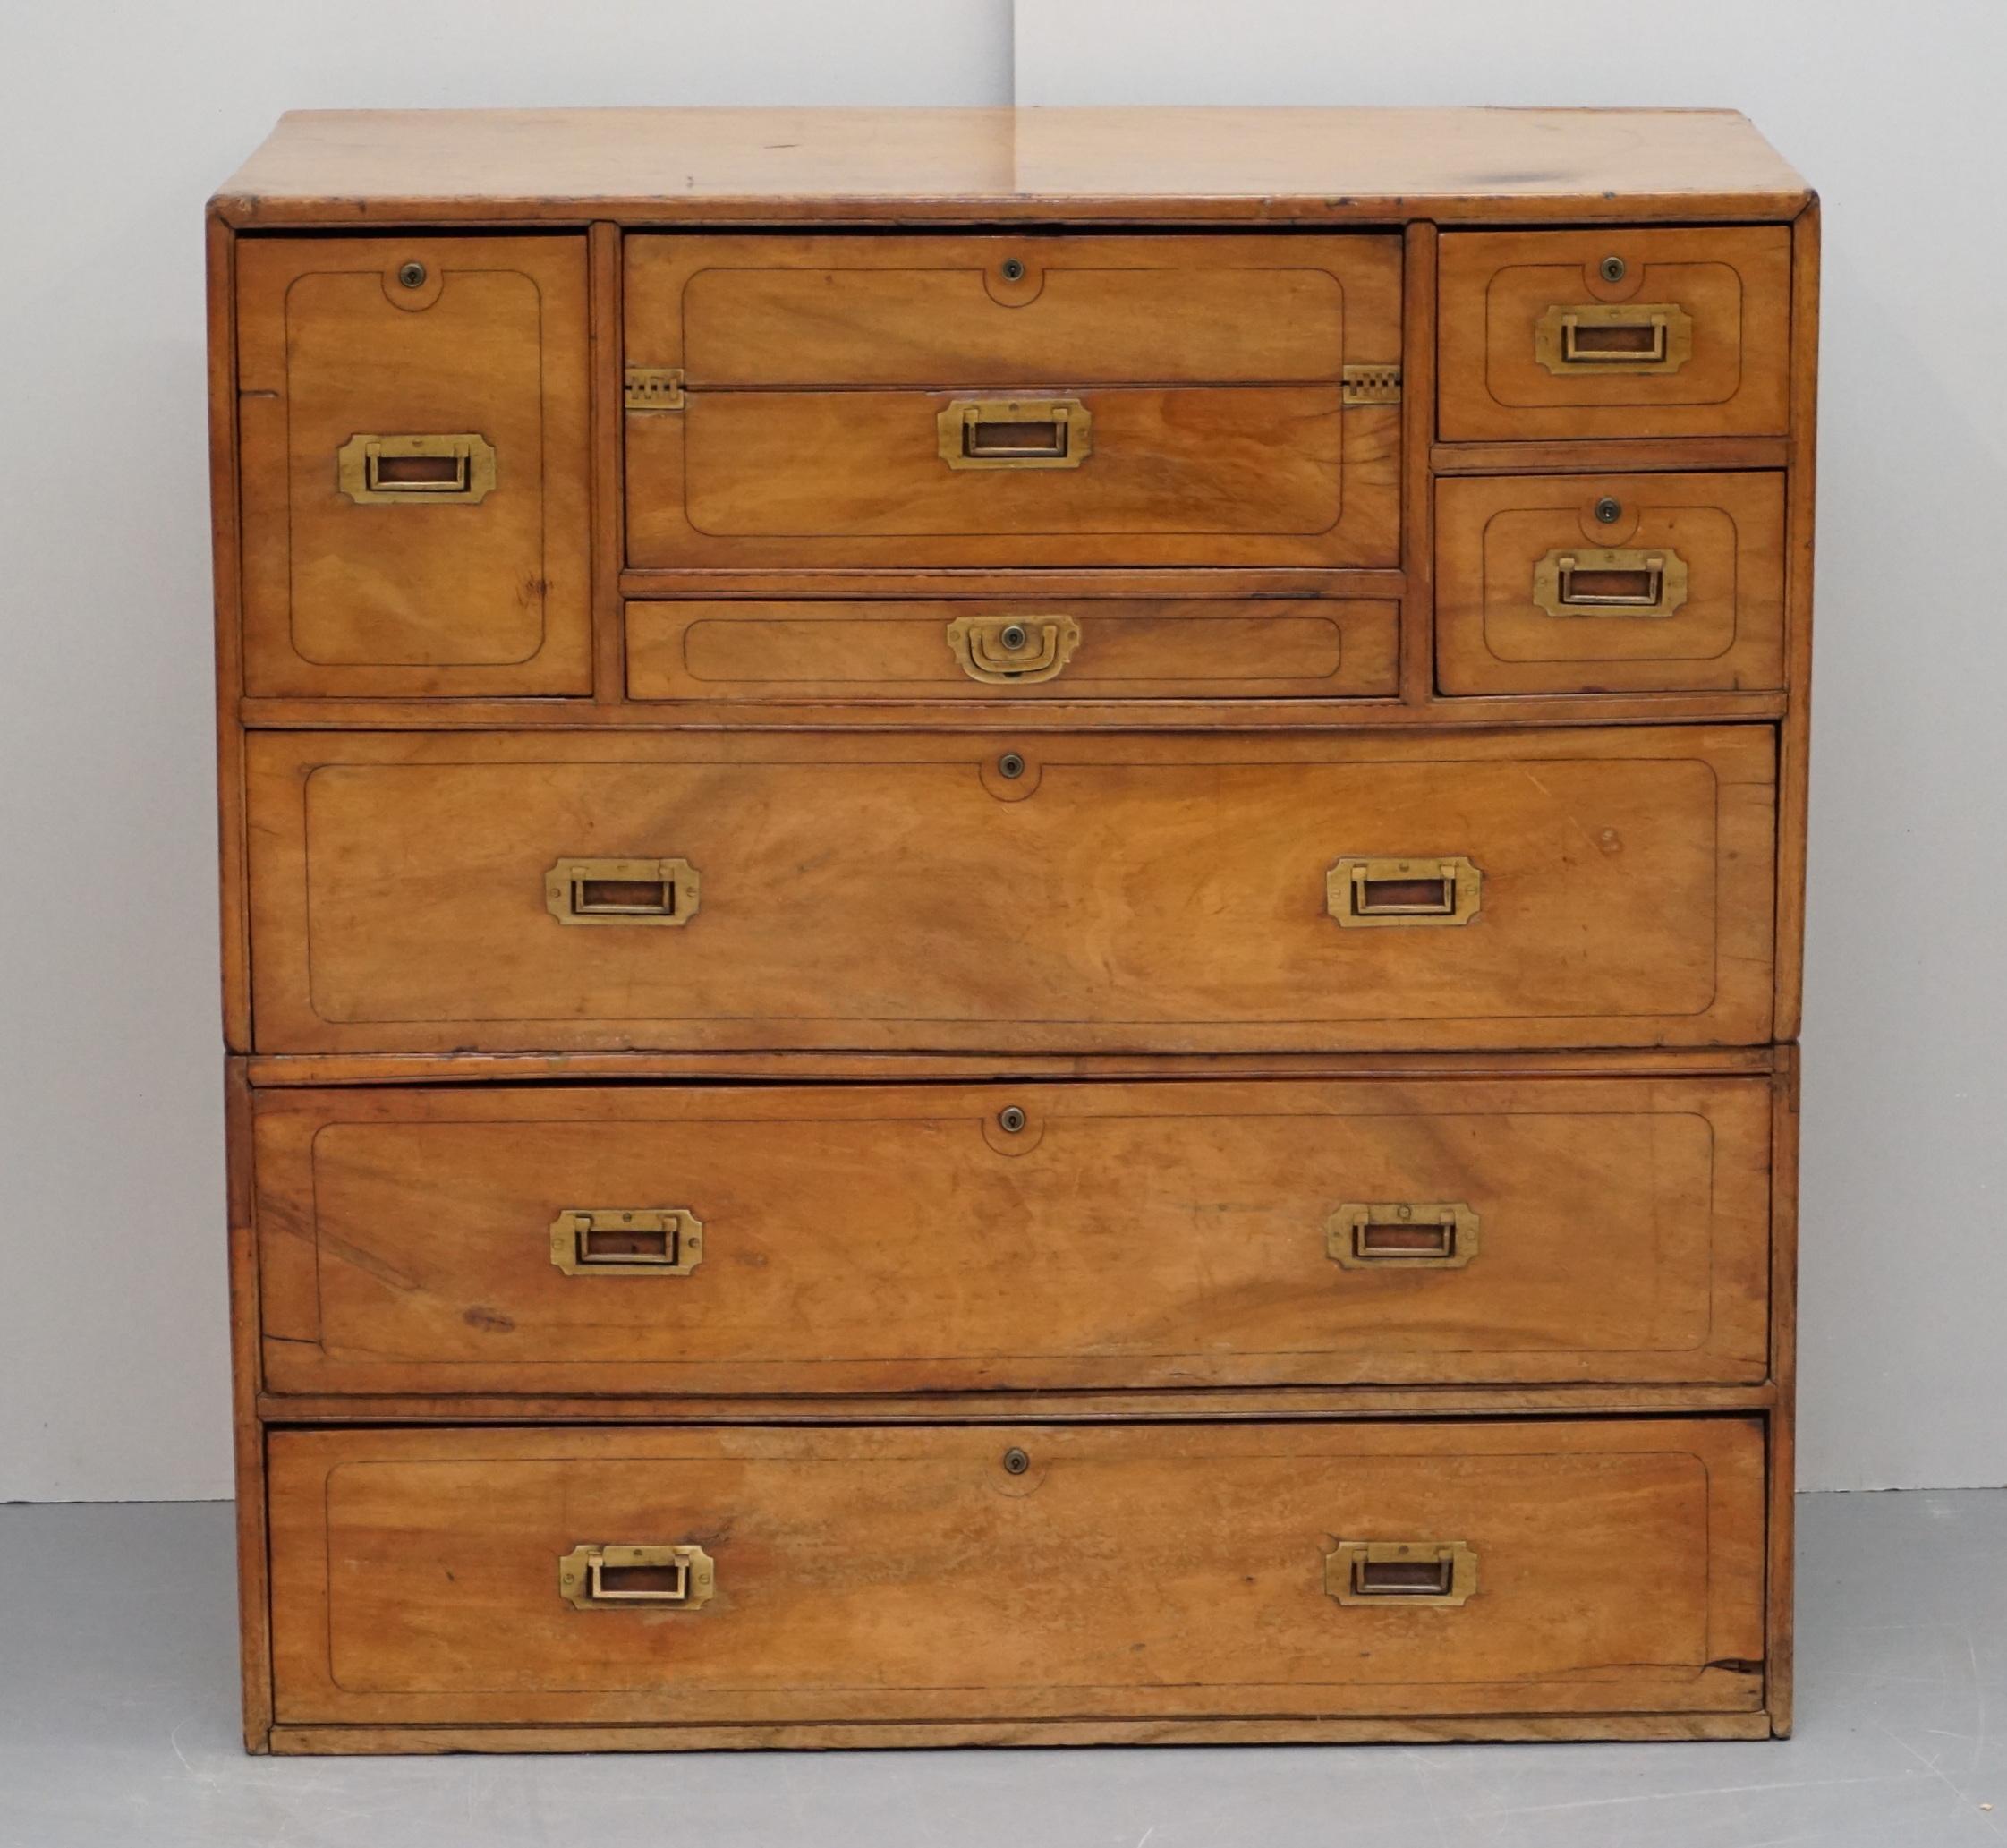 We are delighted to offer for sale this exceptionally rare and very fine solid walnut Military Officers Campaign chest of drawers

If you’re in the market for the absolute finest campaign drawers ever to come to market then look no further, these